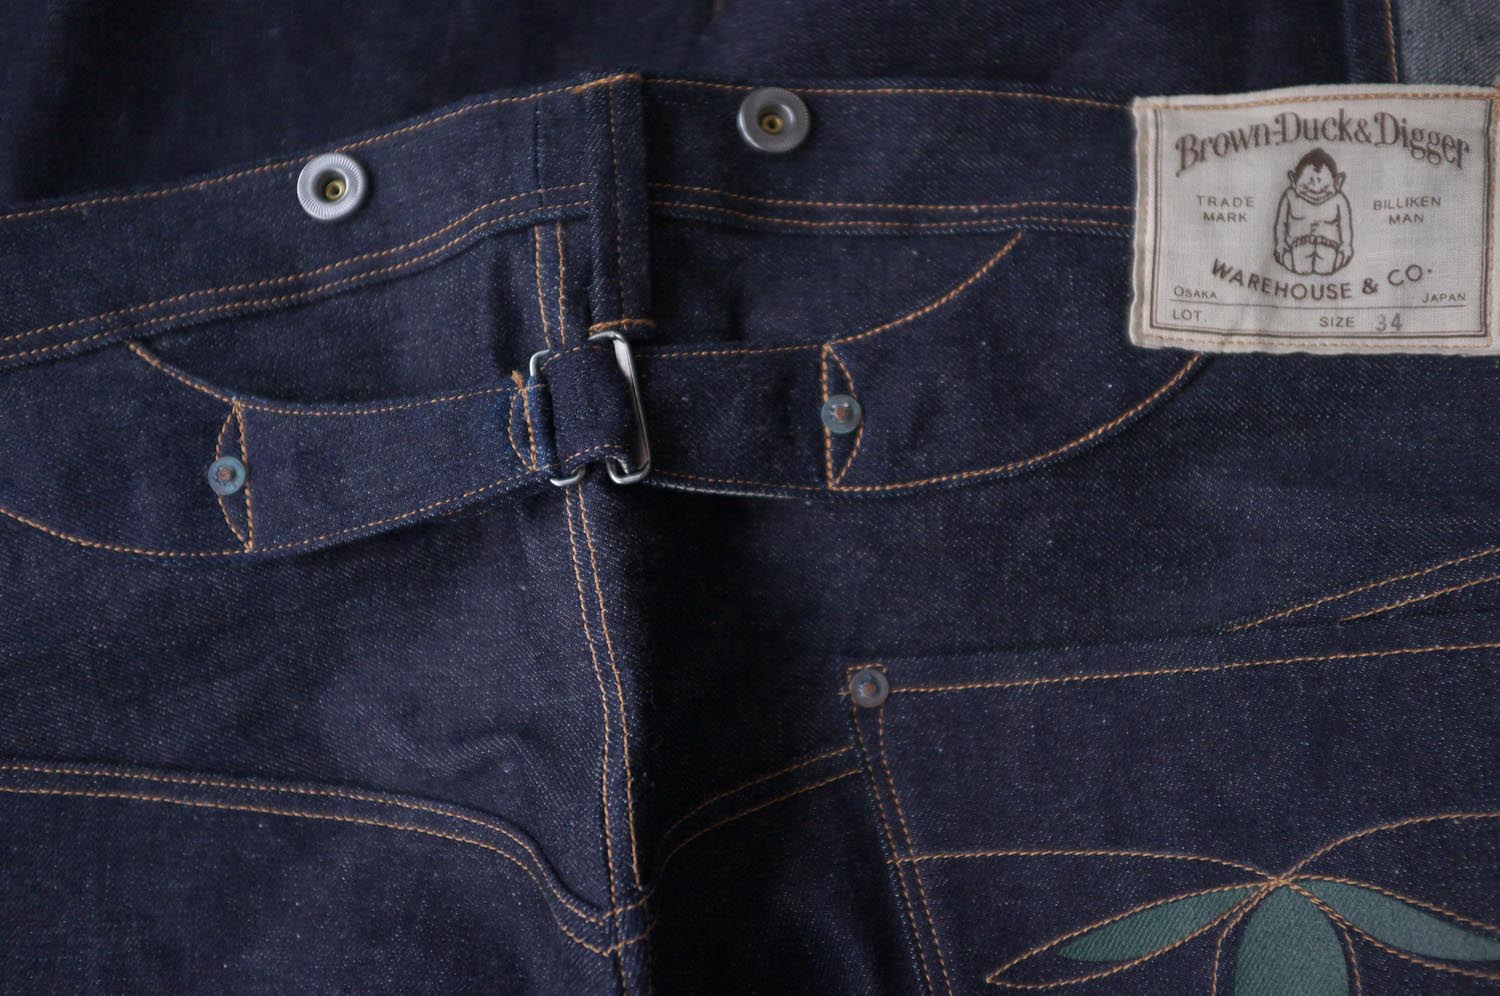 Jeans Just As They Should Be - Brown-Duck & Digger - Rope Dye